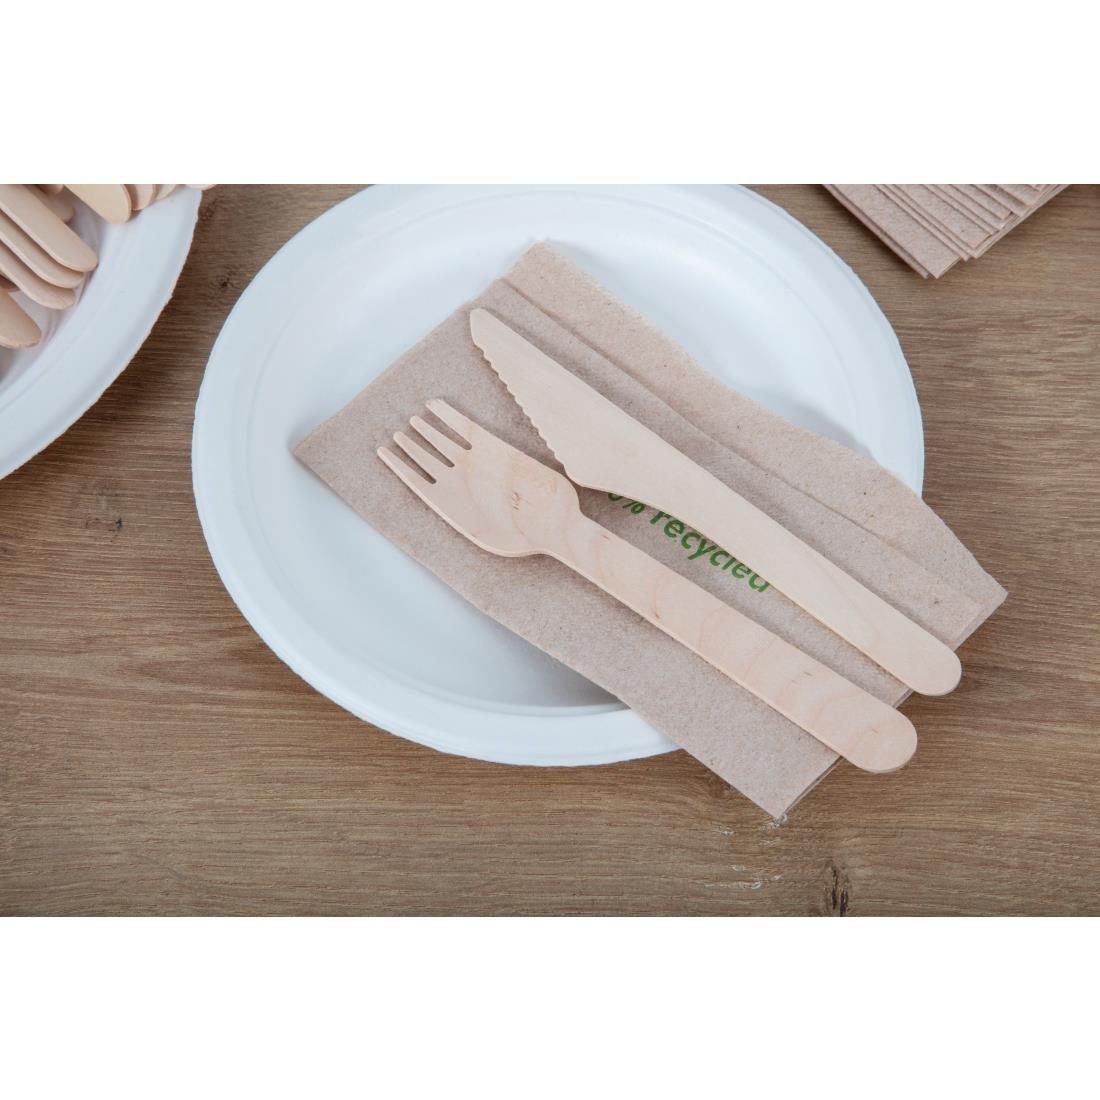 Fiesta Compostable Disposable Wooden Knives (Pack of 100) - CD902  - 3